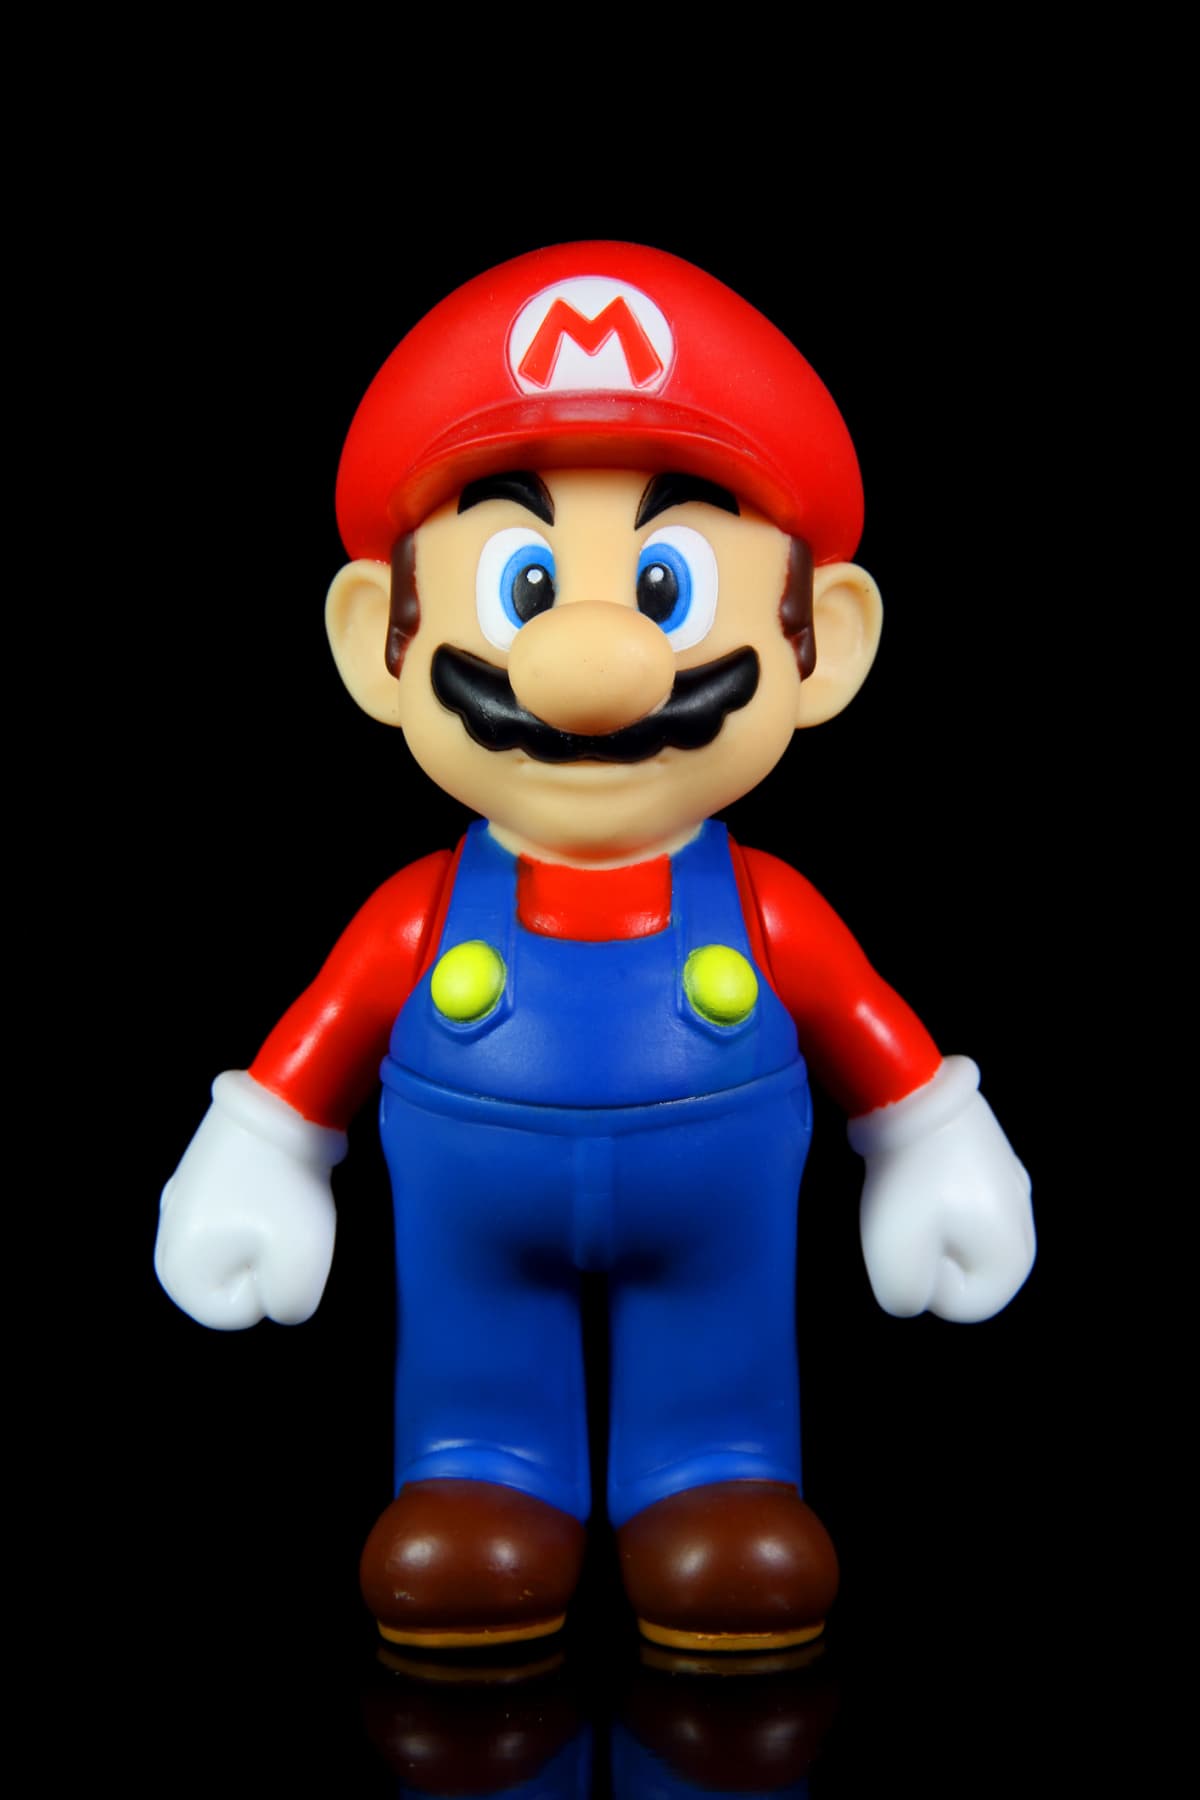 Mario from the Nintendo Super Mario franchise against a black background